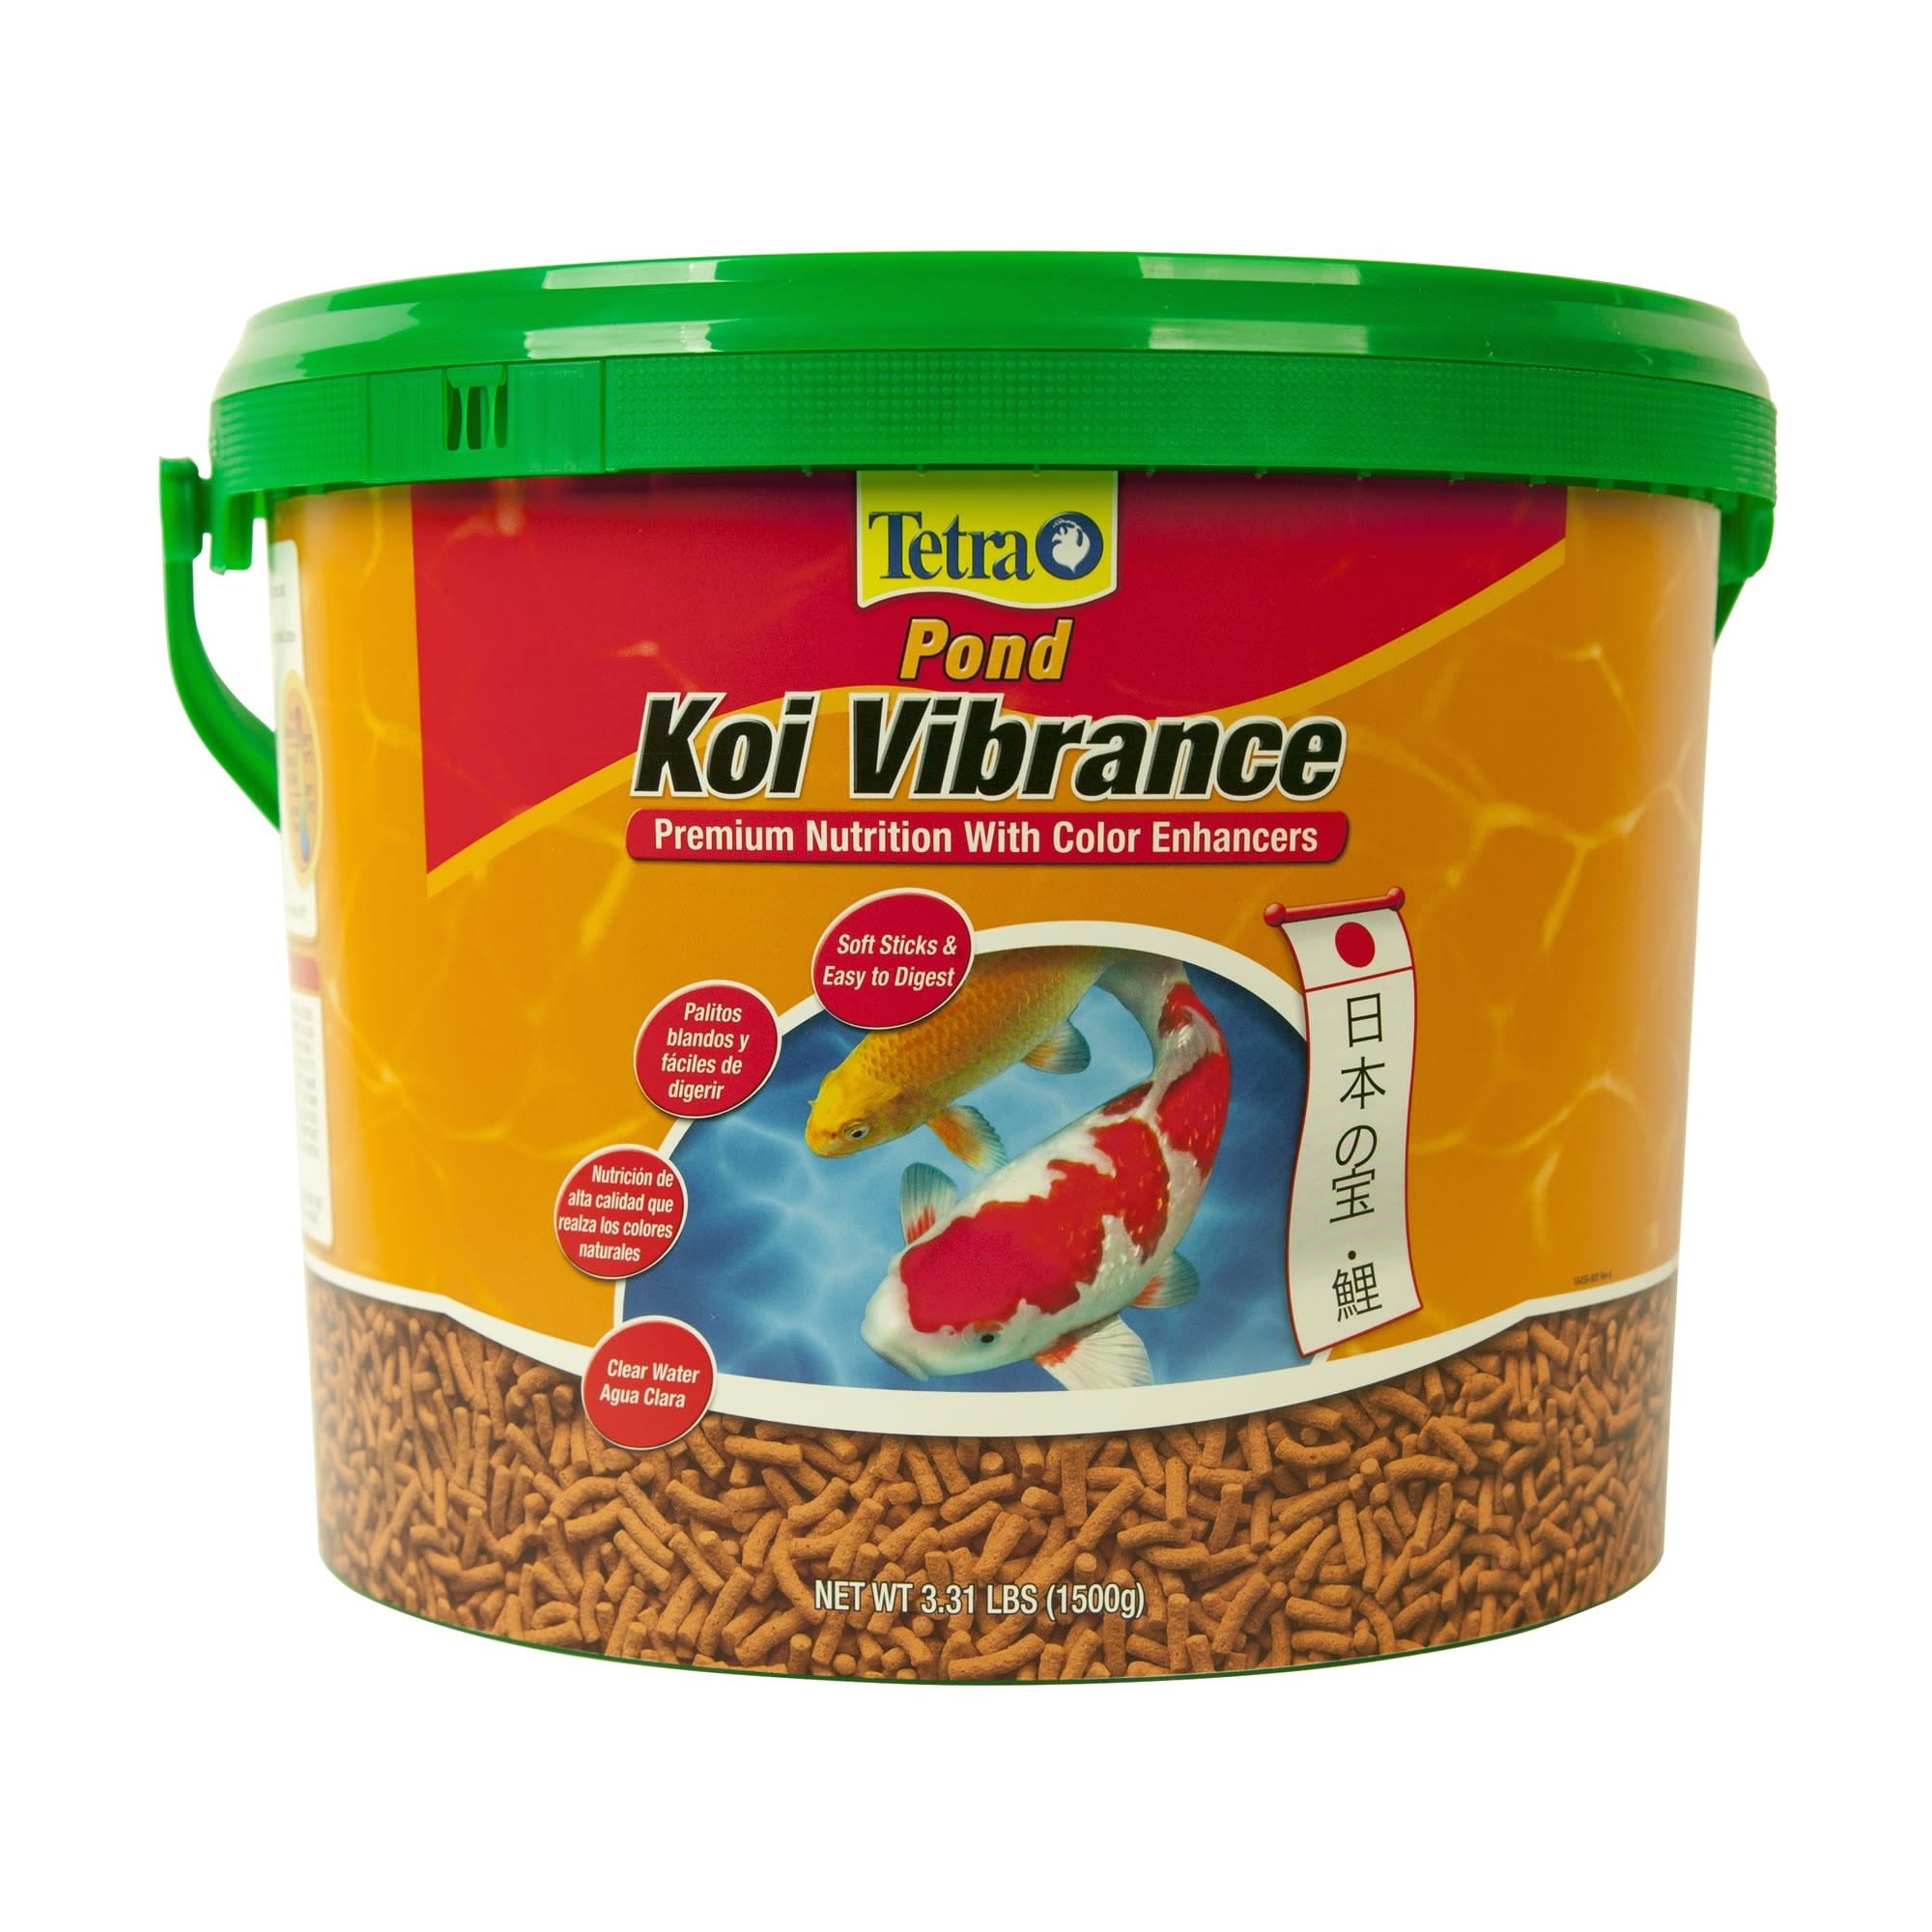 Tetra Koi Vibrance 16.5 pounds Pond Fish Food Sticks in the Pond  Accessories department at